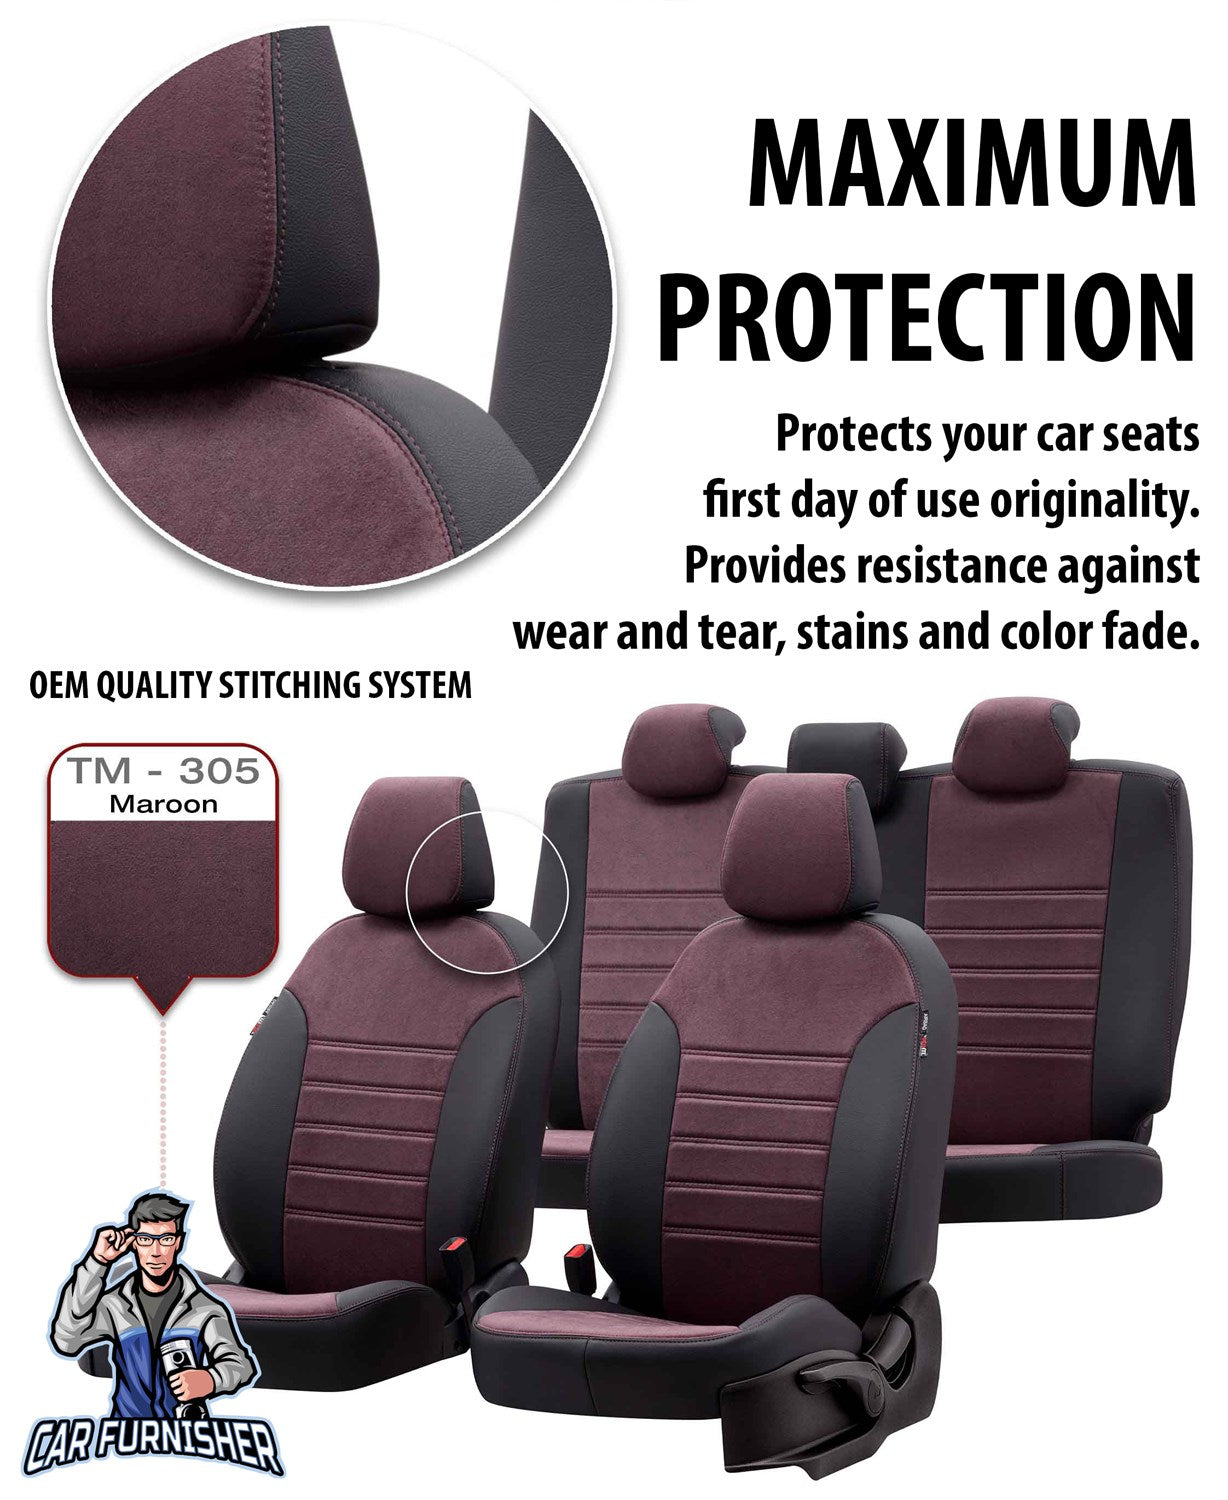 Toyota Avensis Seat Cover Milano Suede Design Smoked Leather & Suede Fabric